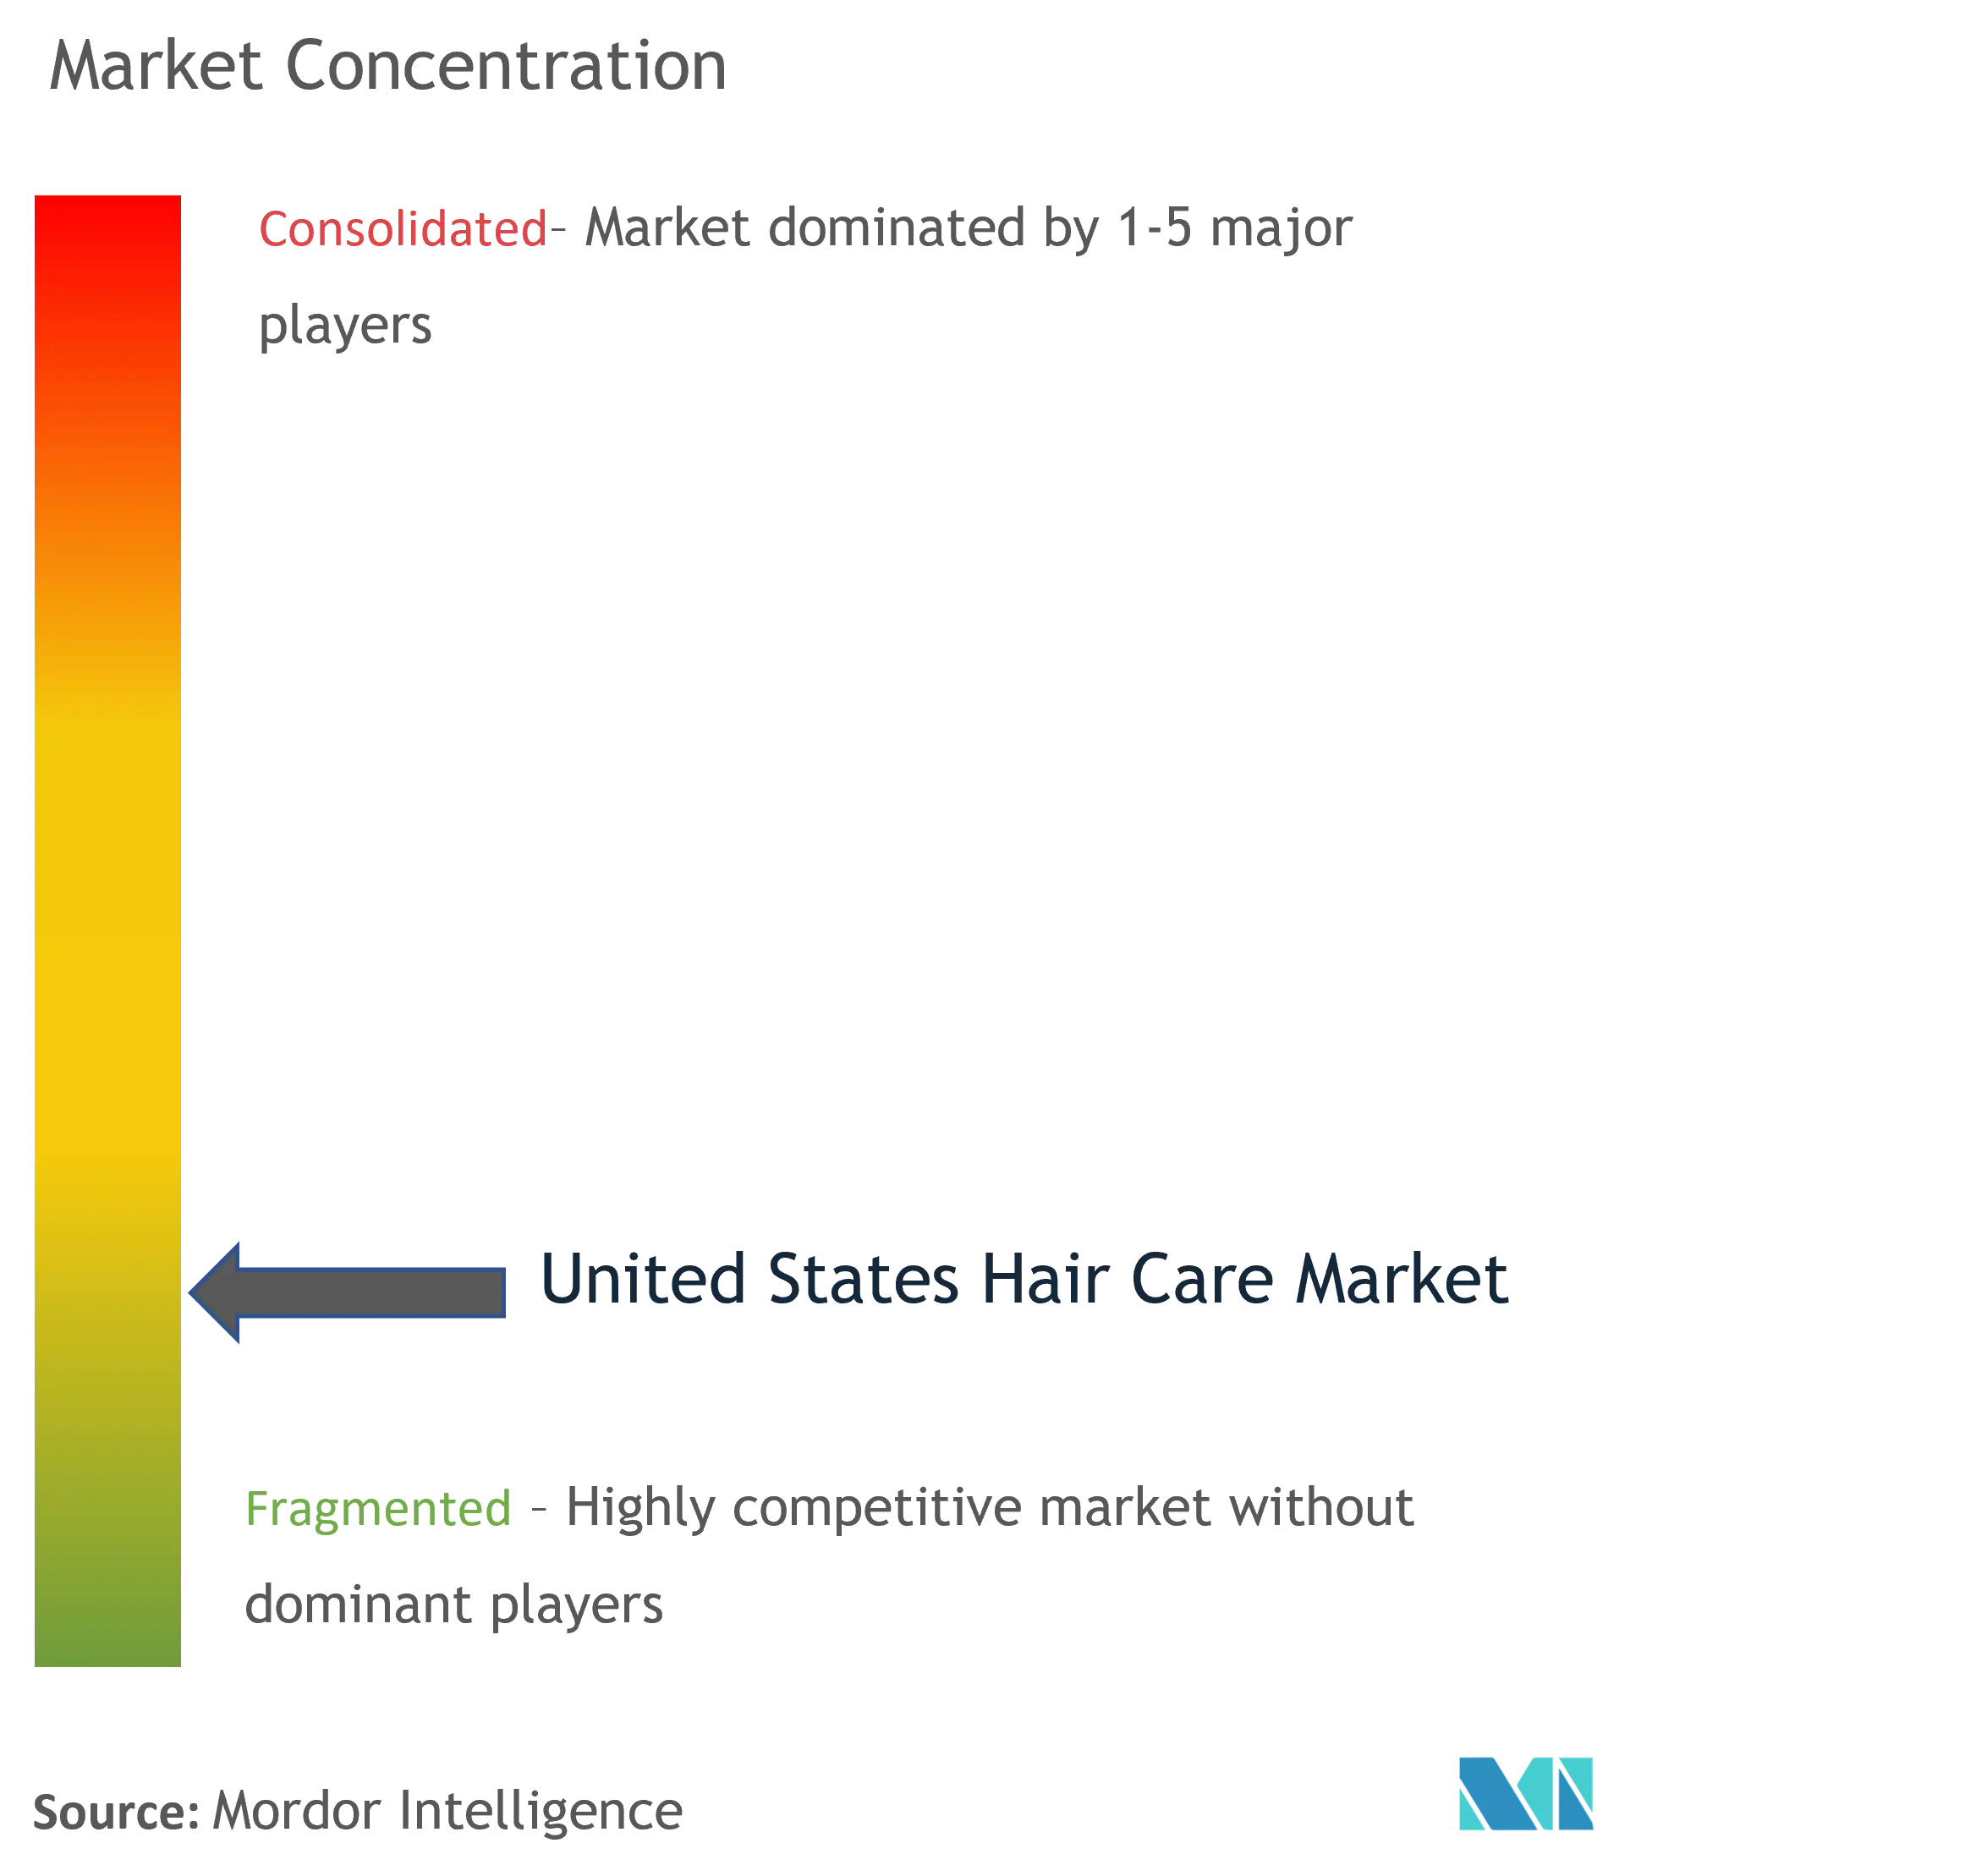 United States Hair Care Market.png